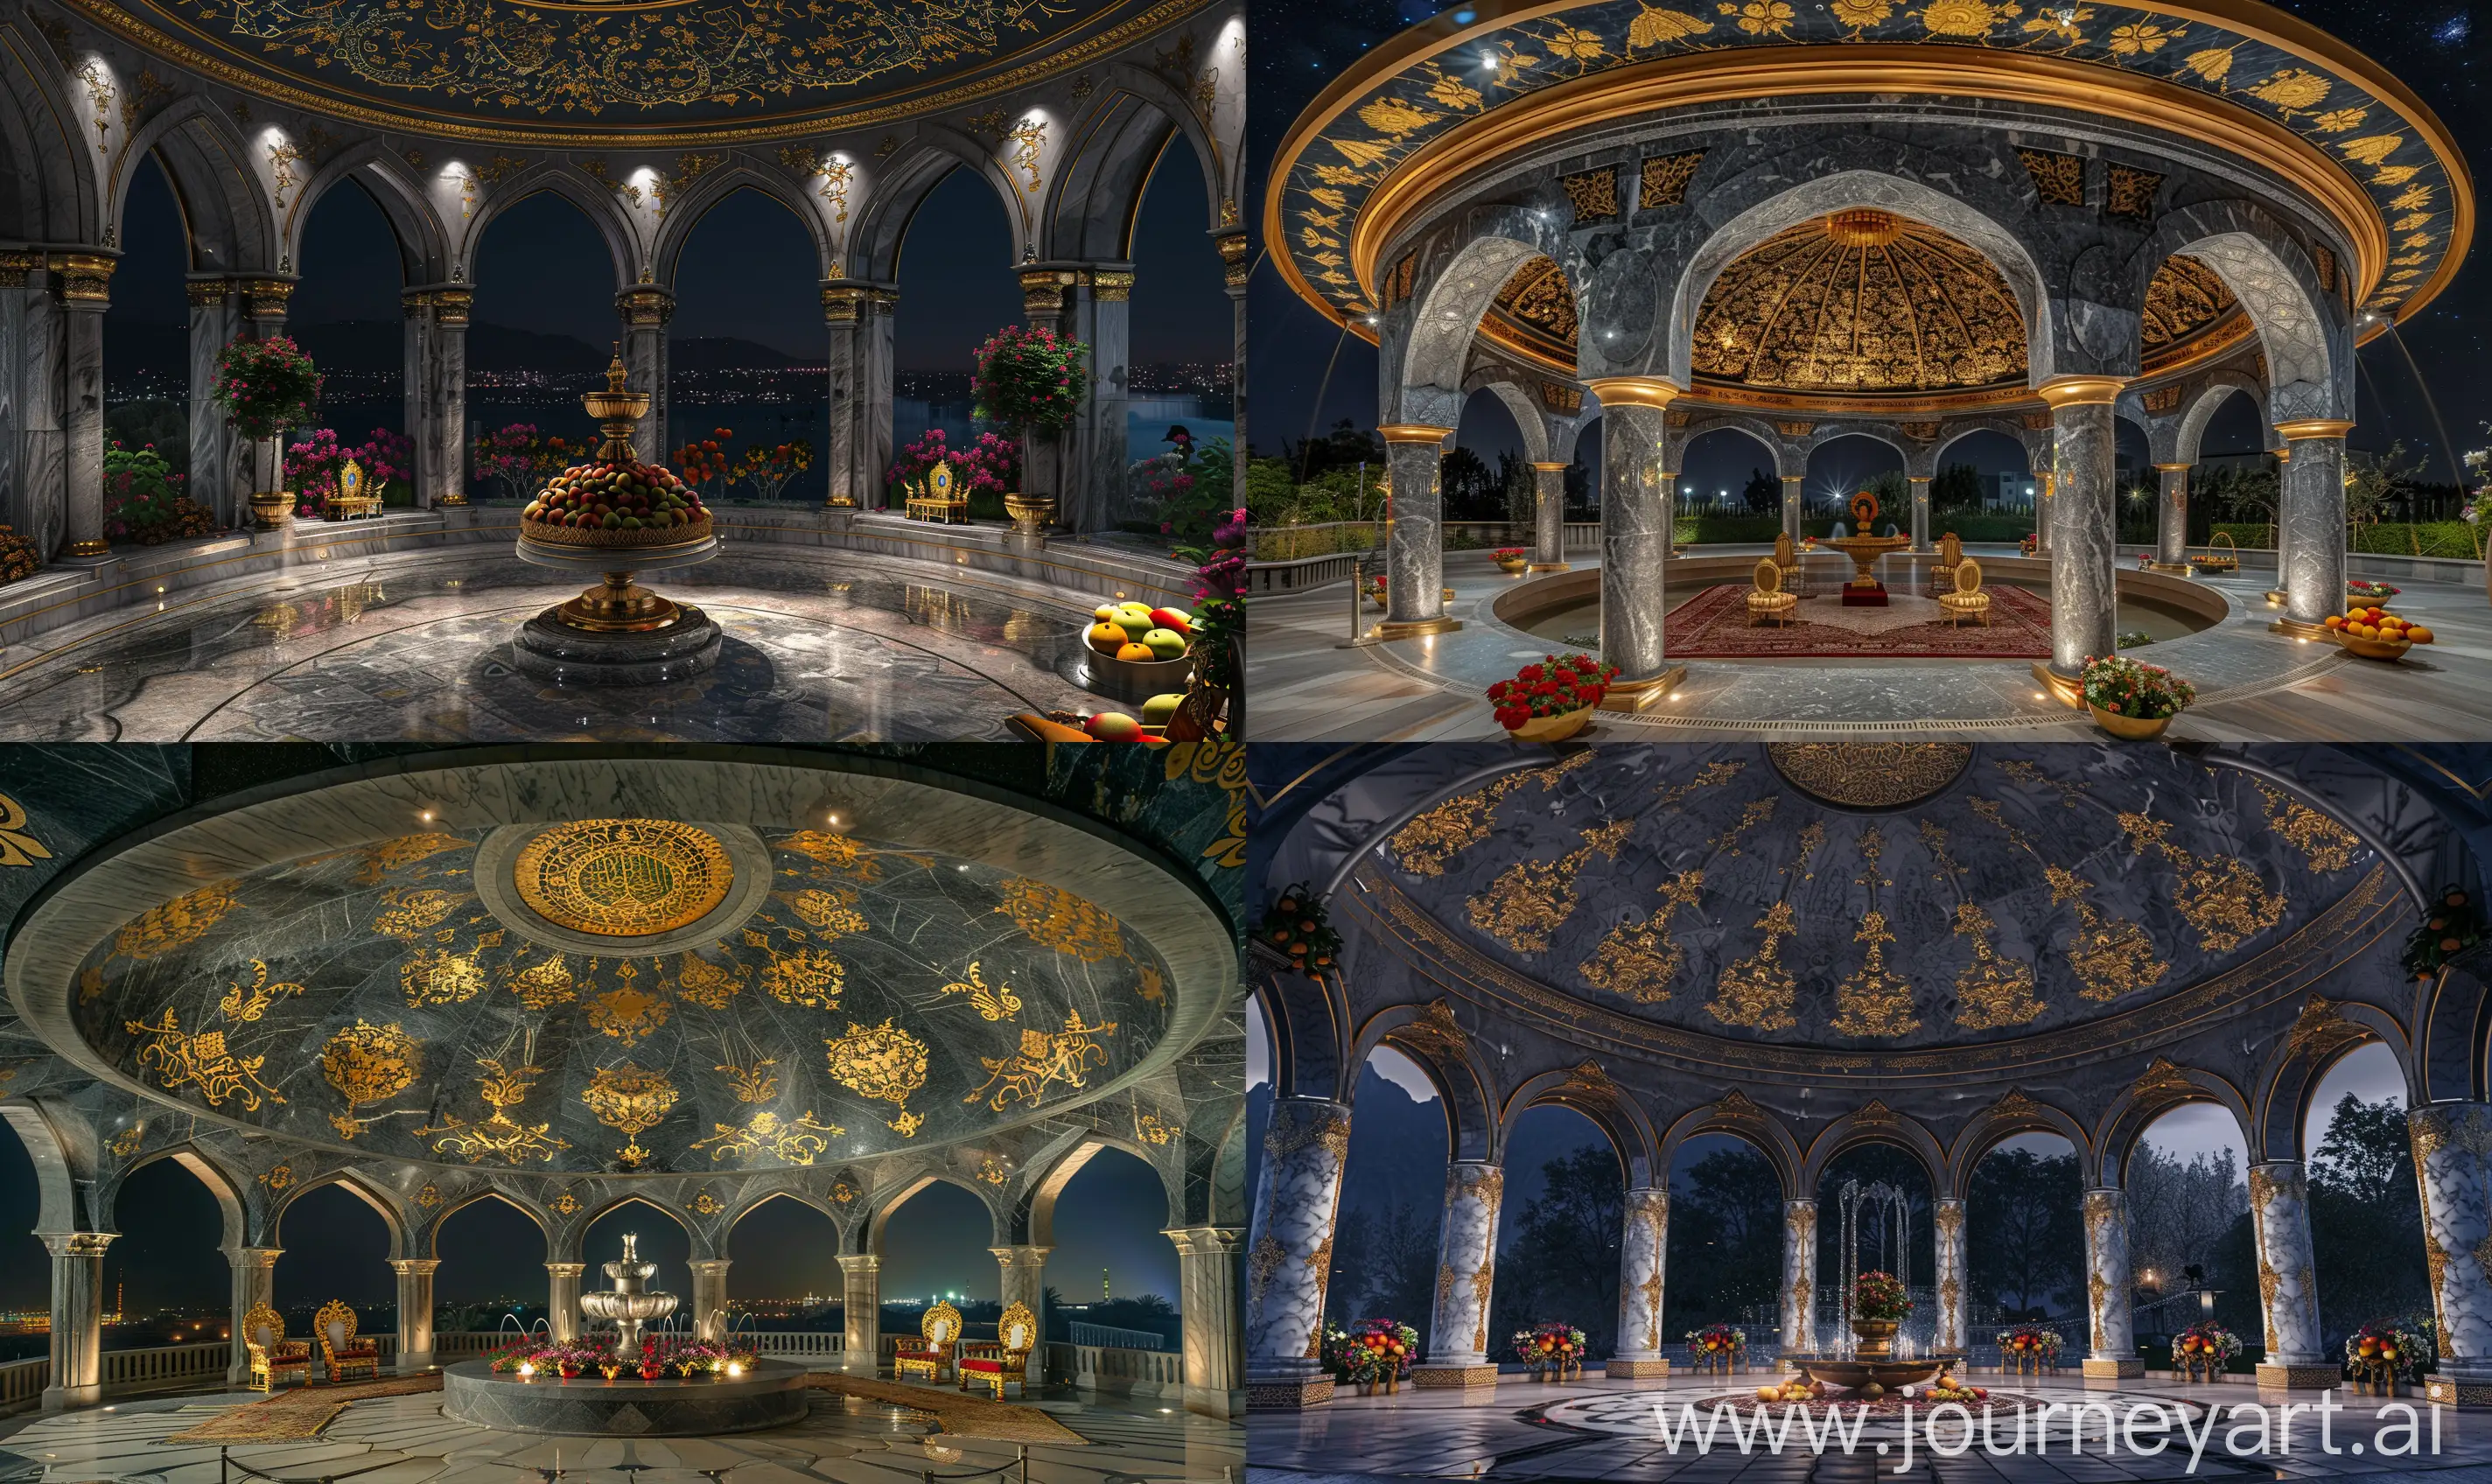 Luxurious-Persian-Pavilion-with-Mughal-Arches-and-Floral-Designs